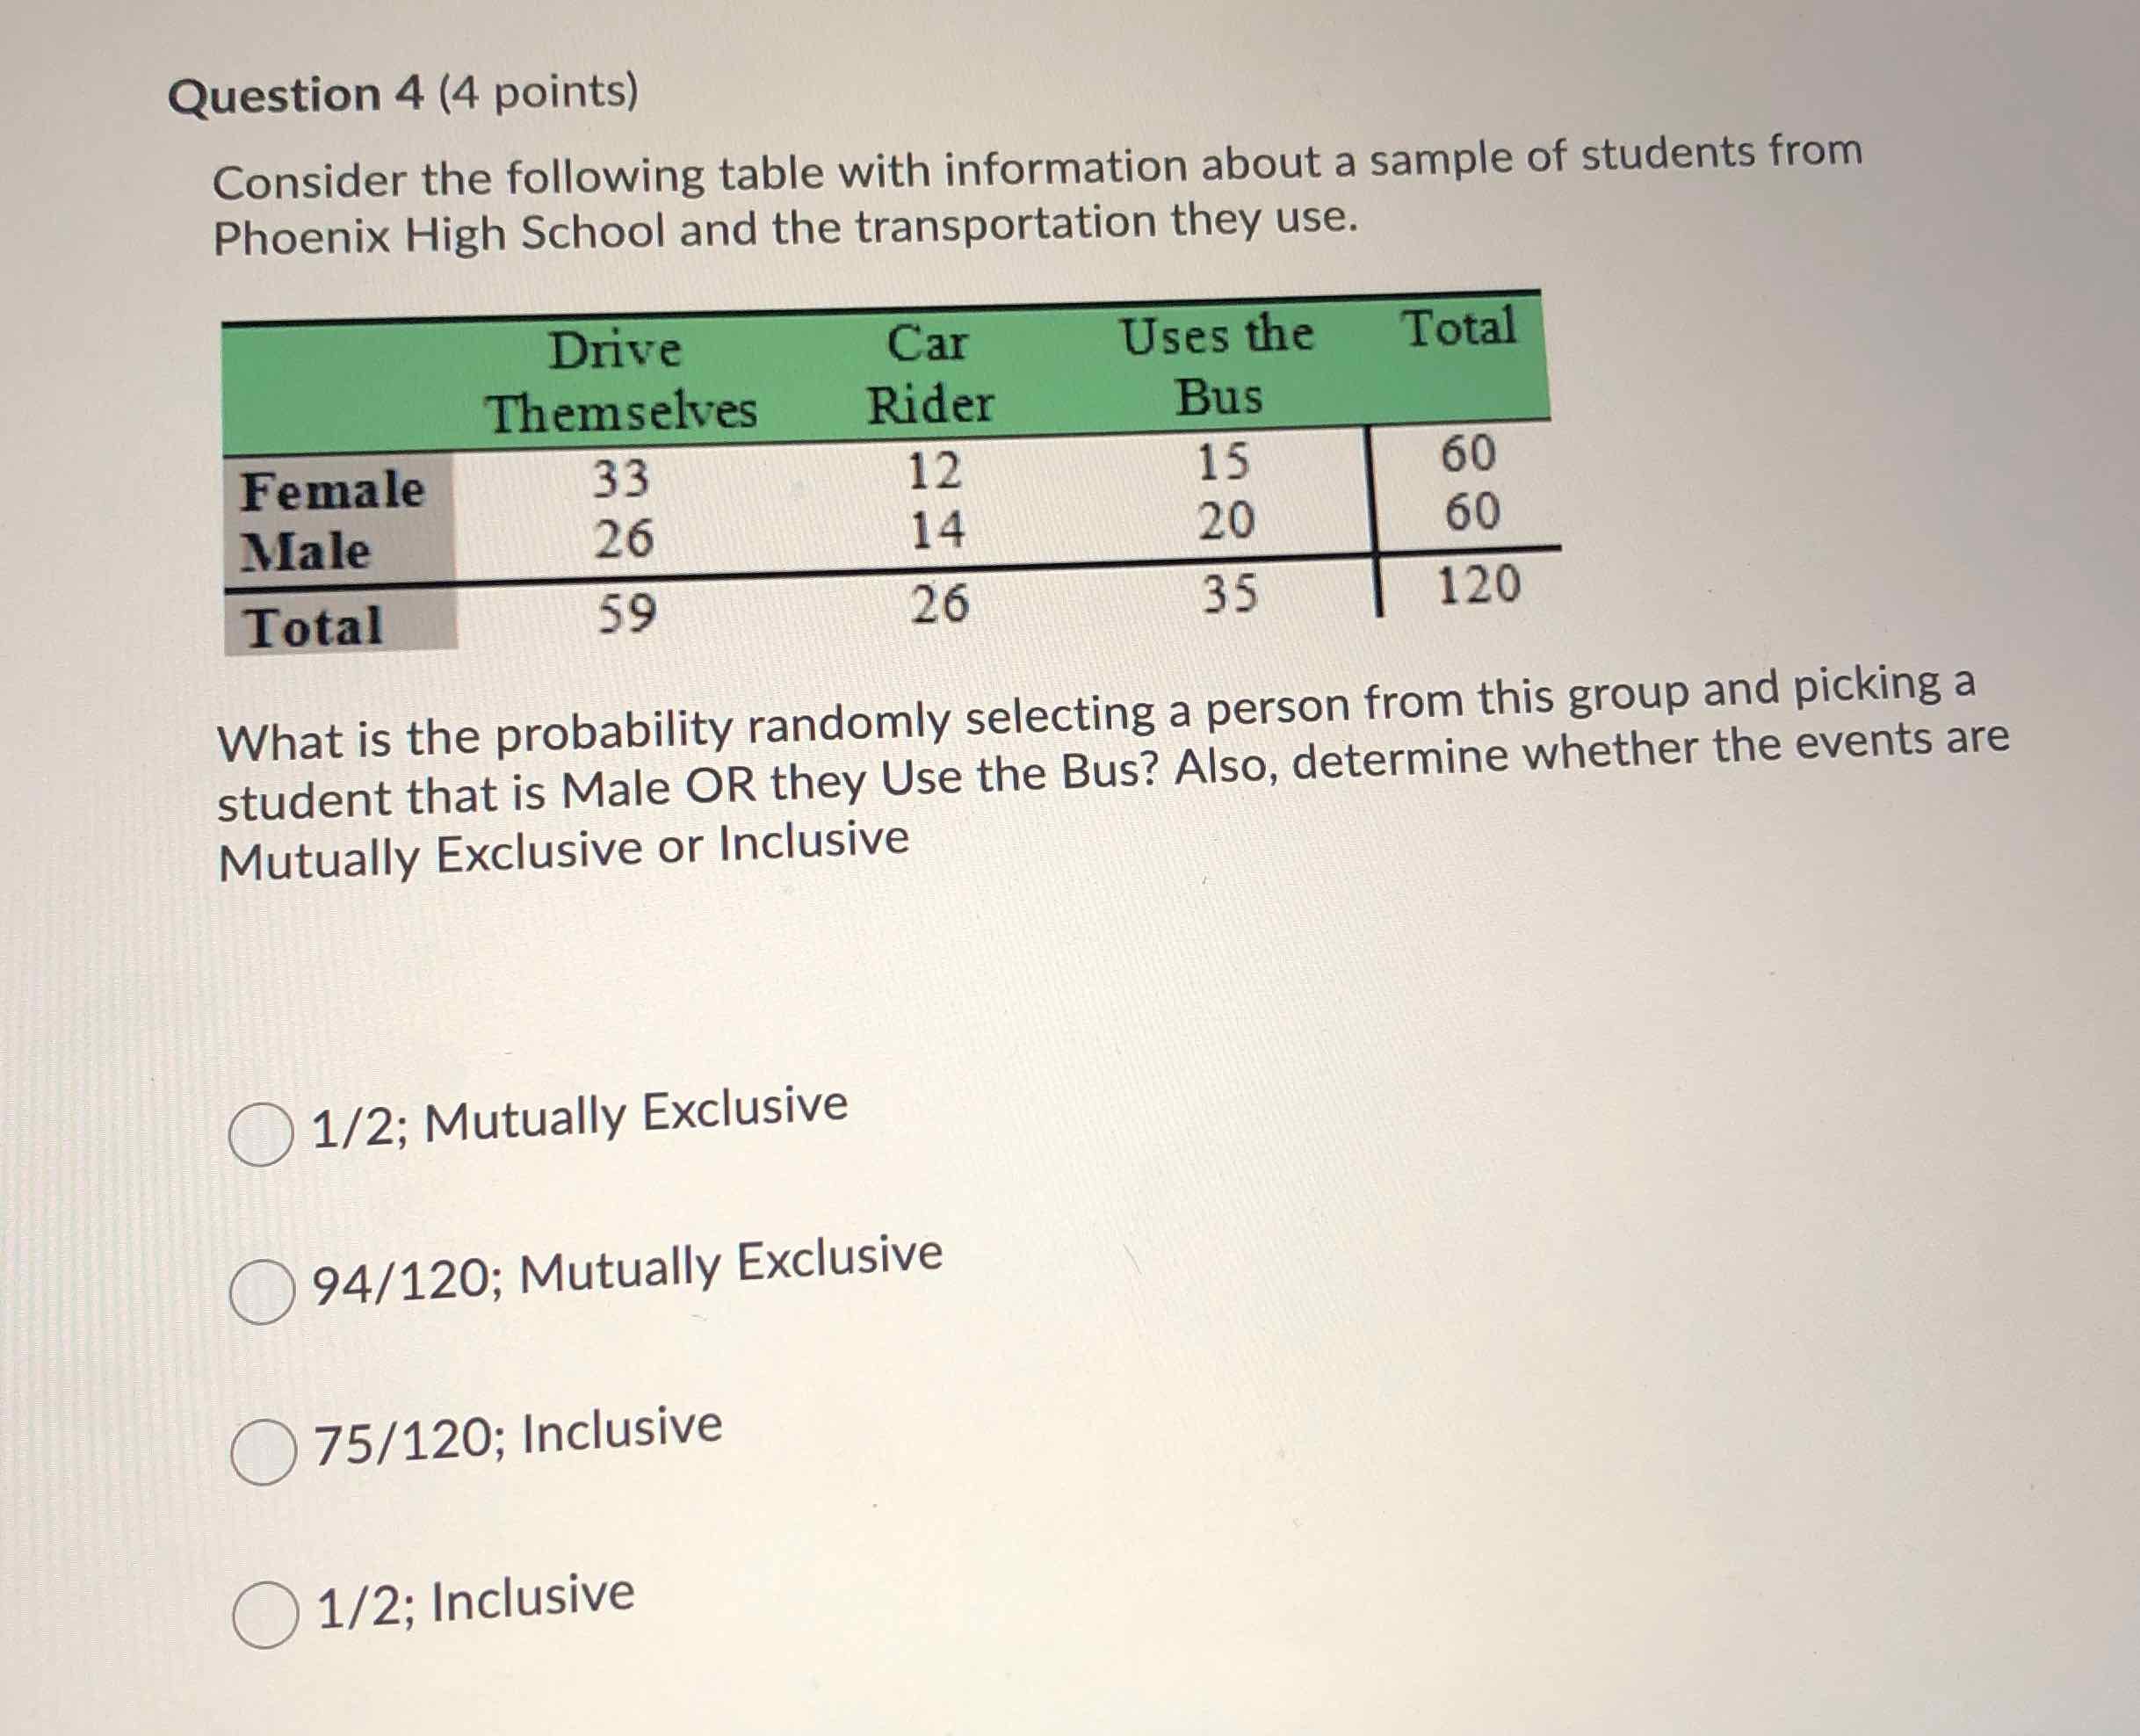 Question 4 (4 points)
Consider the following table with information about a sample of students from Phoenix High School and the transportation they use.
\begin{tabular}{lcccc}
\hline & Drive Themselves & Car Rider & Uses the Bus & Total \\
\hline Female & 33 & 12 & 15 & 60 \\
Male & 26 & 14 & 20 & 60 \\
\hline Total & 59 & 26 & 35 & 120
\end{tabular}
What is the probability randomly selecting a person from this group and picking a student that is Male OR they Use the Bus? Also, determine whether the events are Mutually Exclusive or Inclusive
1/2; Mutually Exclusive
94/120; Mutually Exclusive
\( 75 / 120 \); Inclusive
1/2; Inclusive